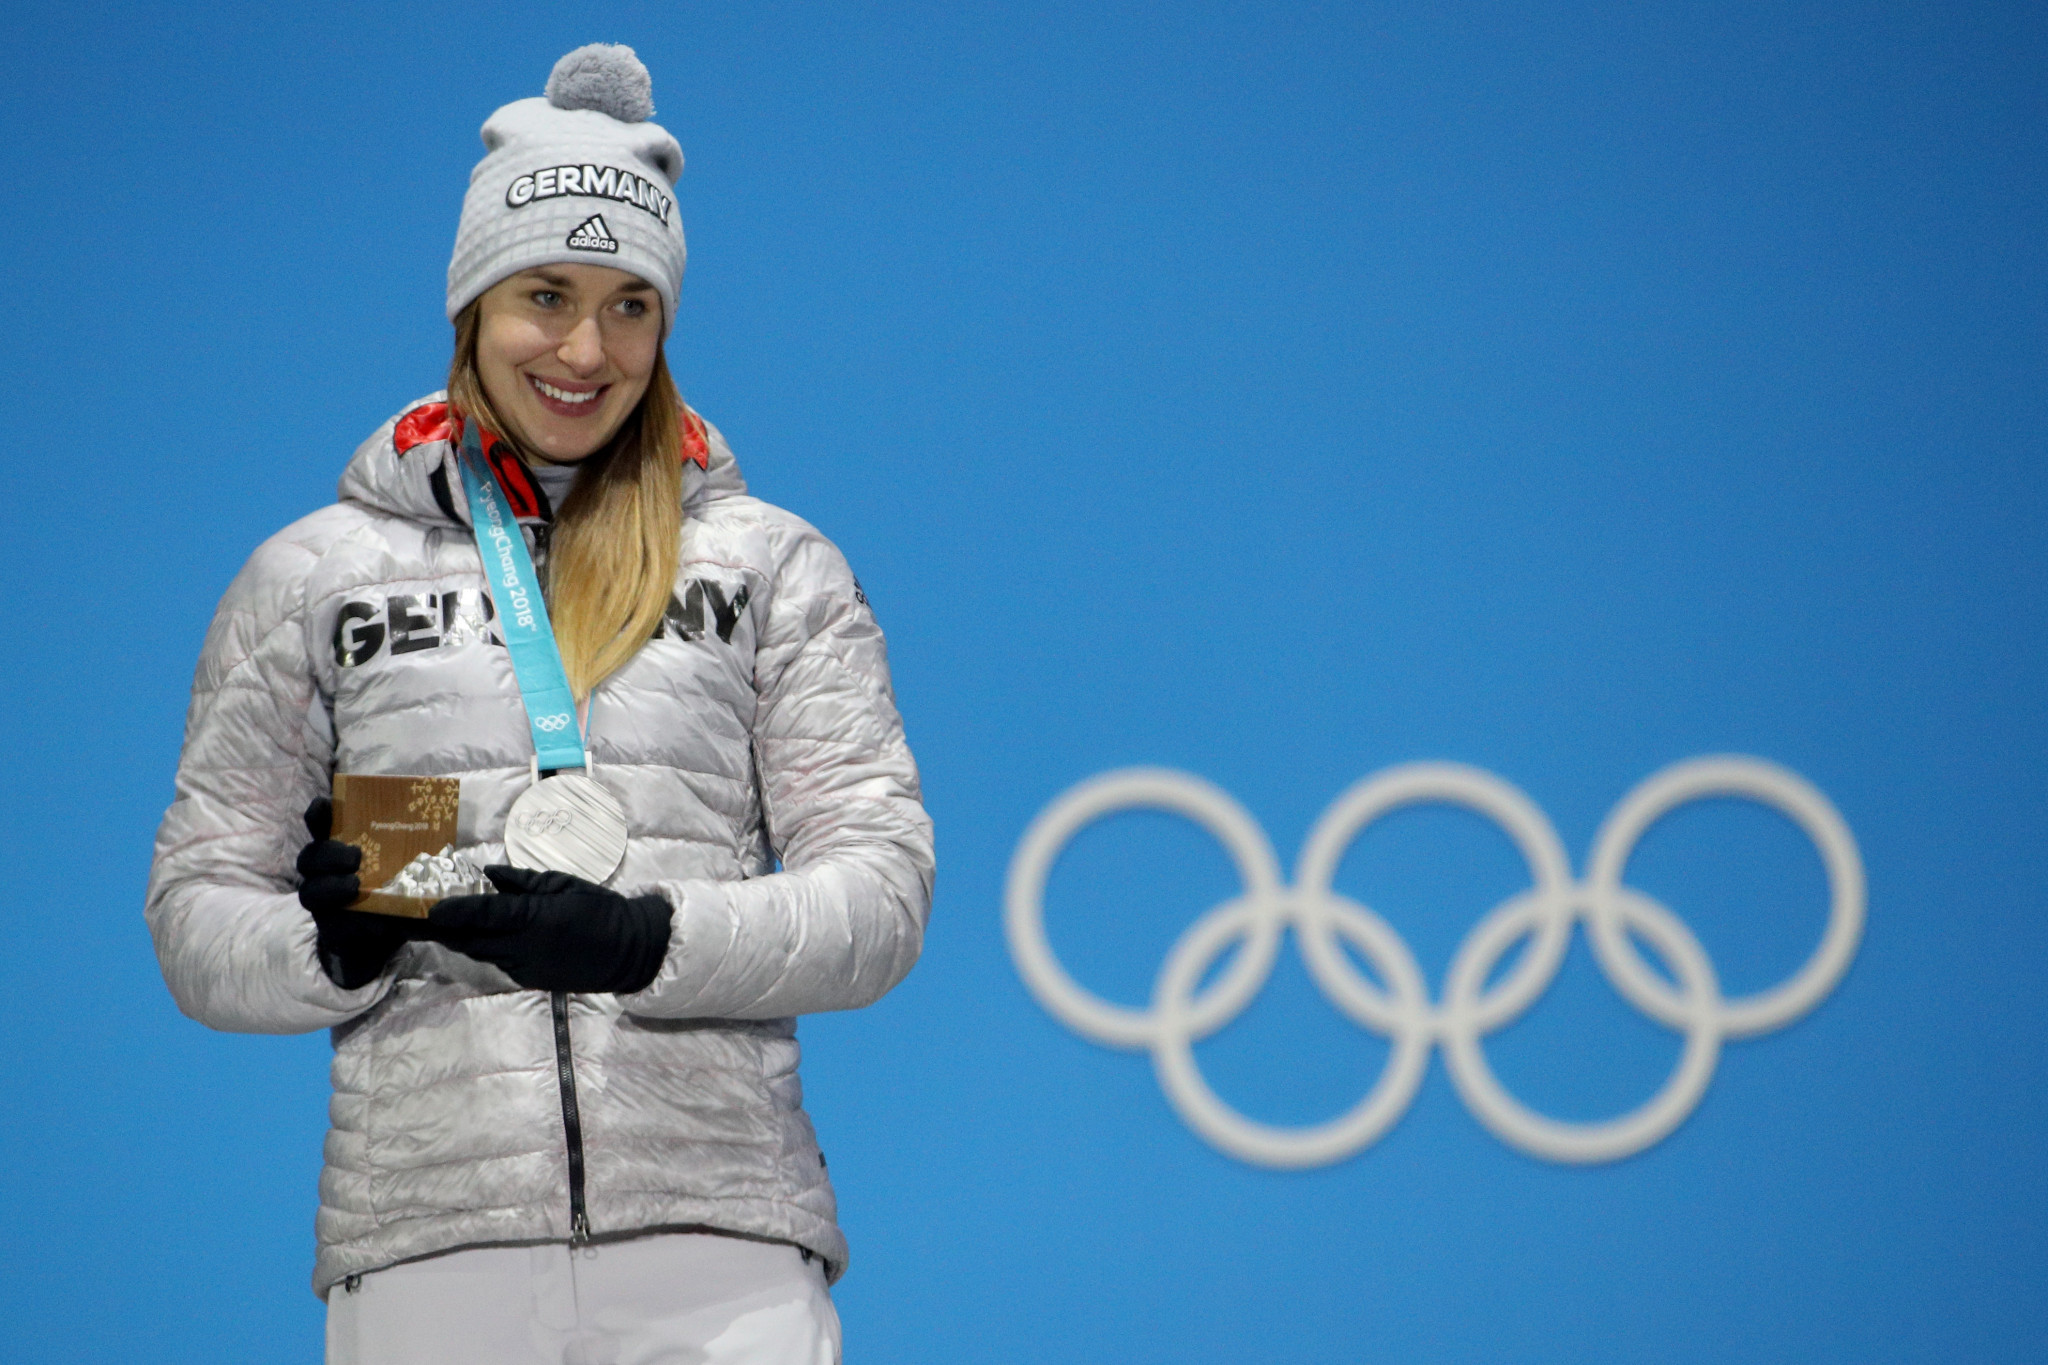 Germany's Jacqueline Lölling claimed an Olympic silver medal in the women's skeleton event at Pyeongchang 2018 but overall results were disappointing ©Getty Images